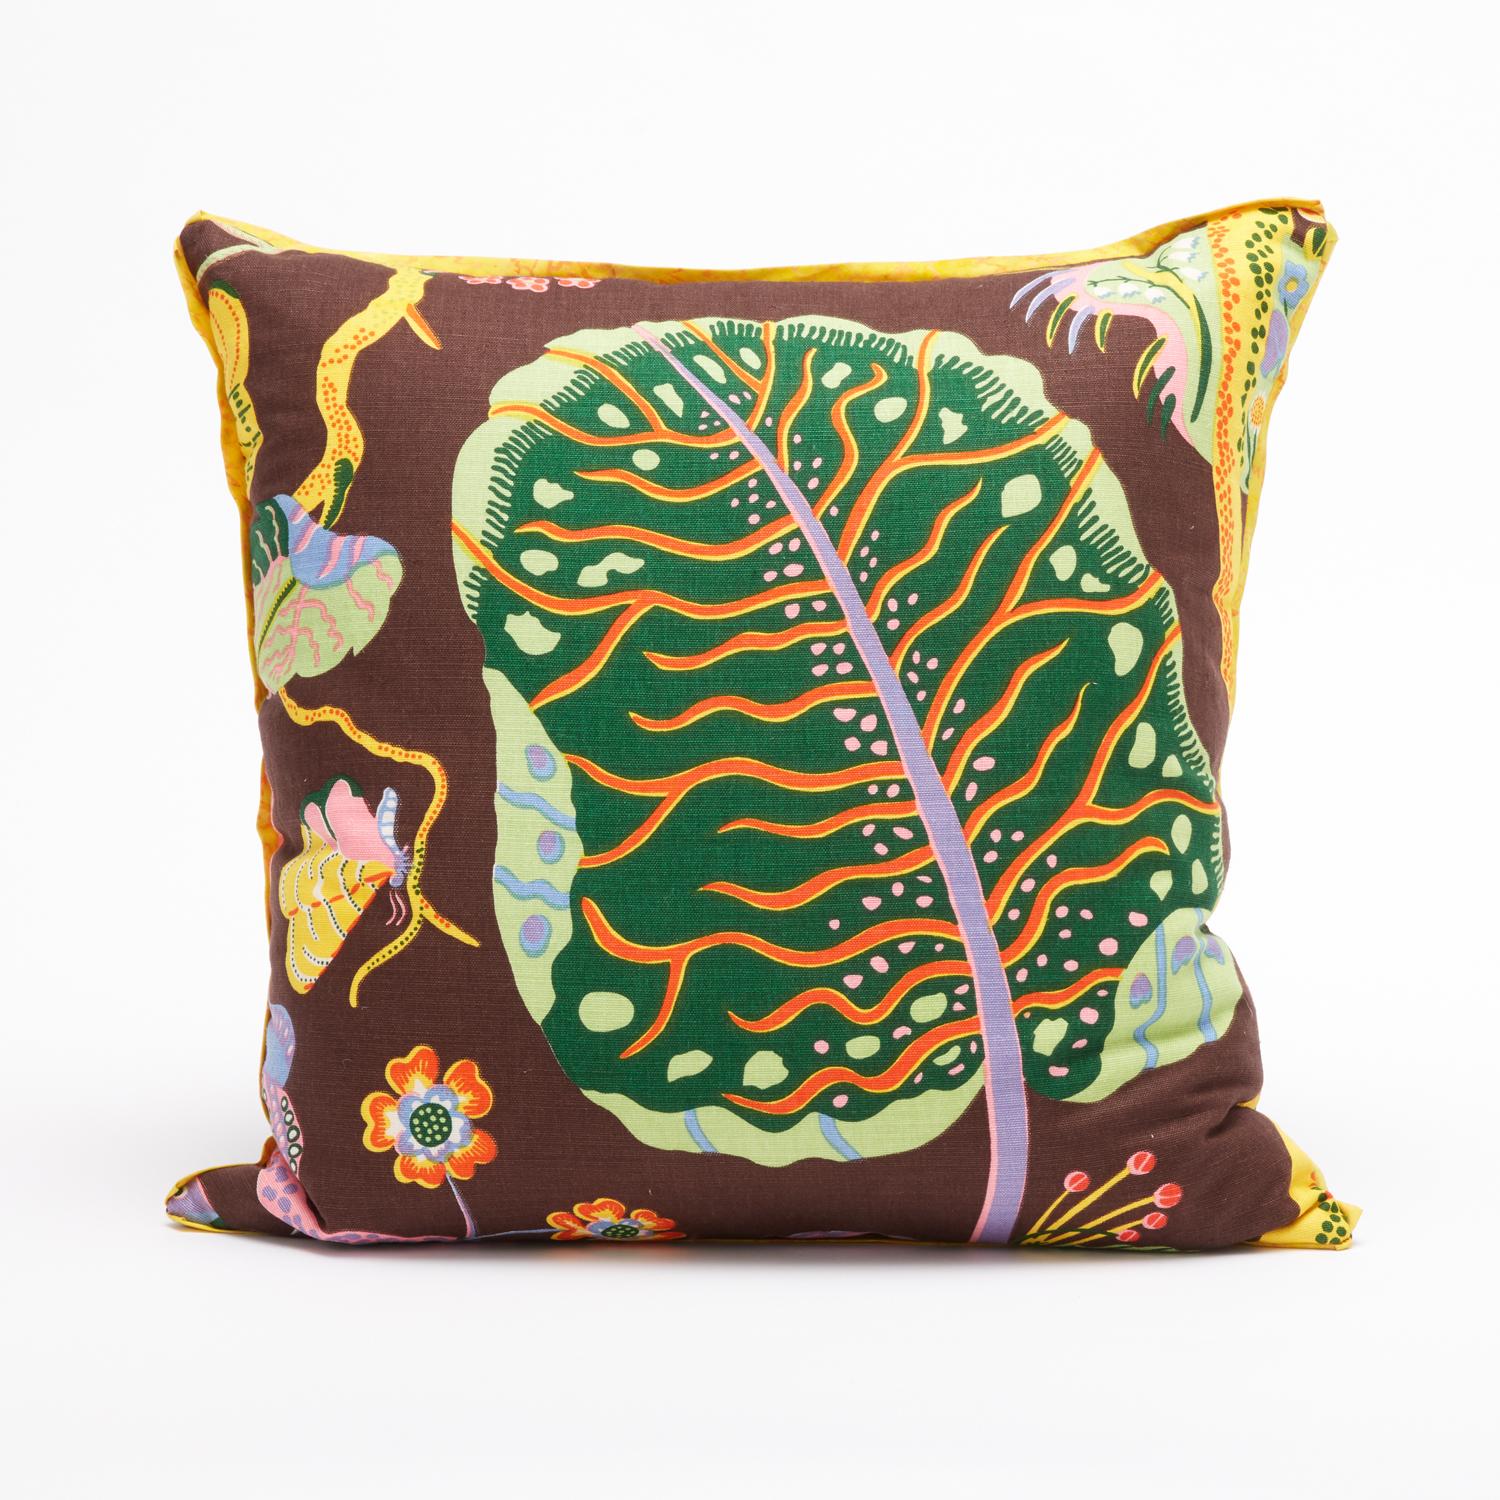 A set of four square cushions featuring vintage fabric by Austrian designer Josef Frank. Each cushion displays a design motif from Josef Frank's 